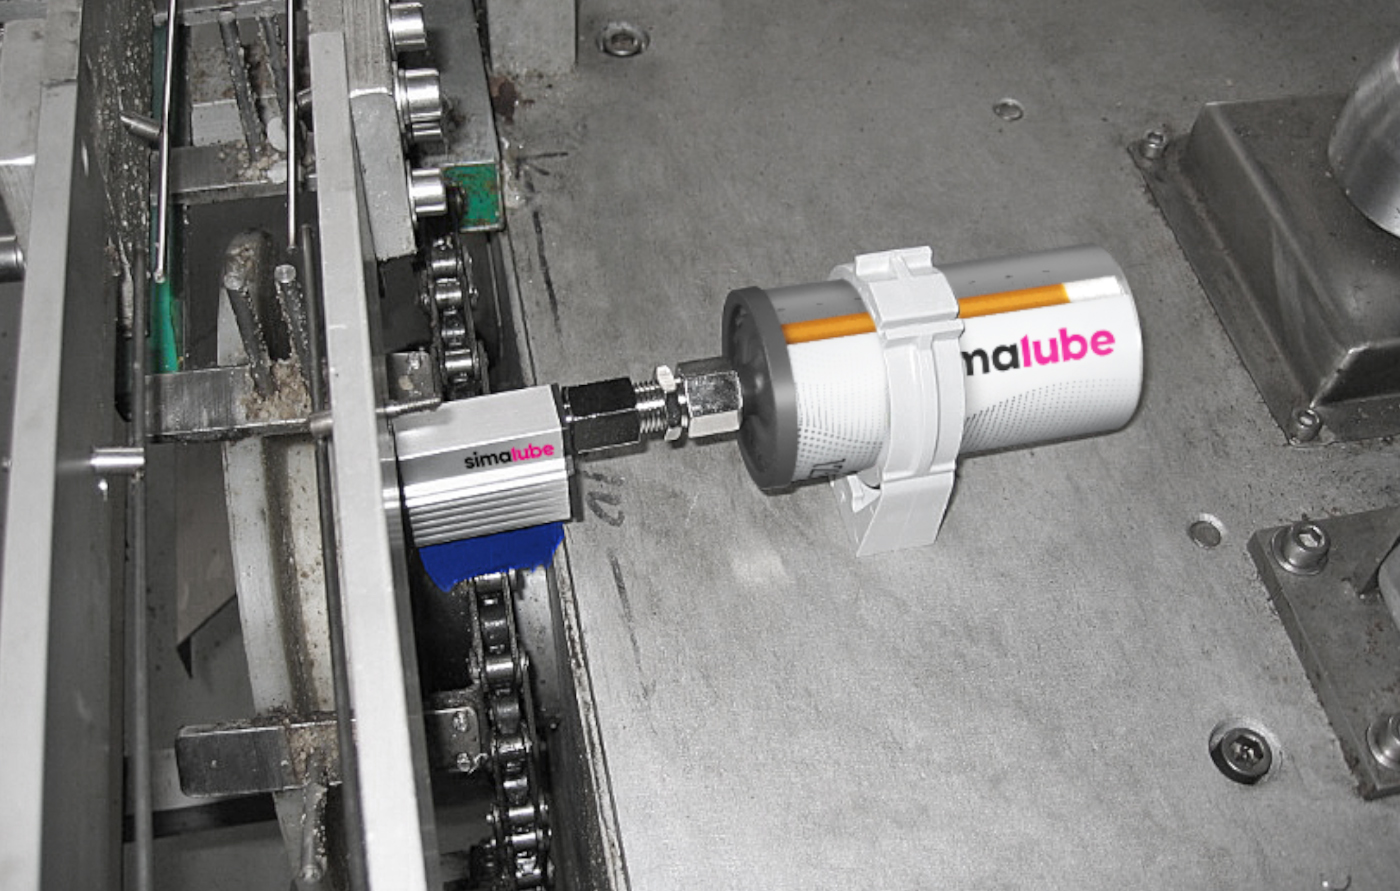 The simalube lubricator lubricates a drive chain of a conveyor belt with a blue flat brush, specially developed for the food industry.